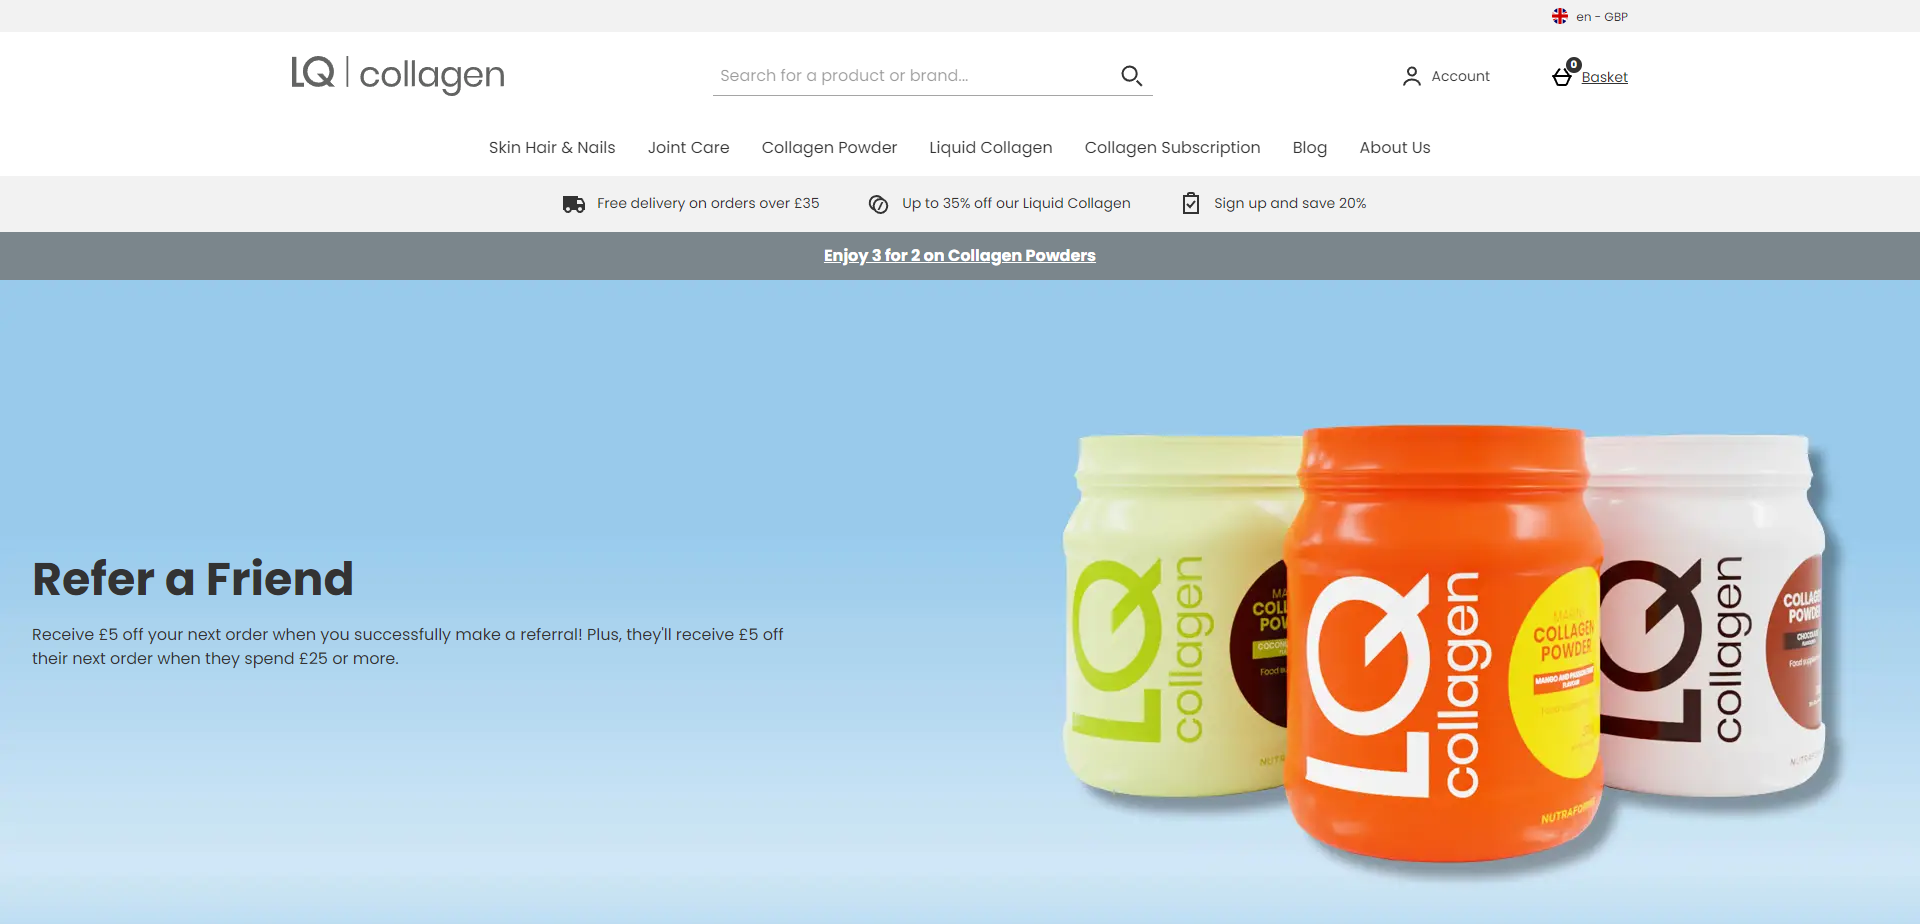 Referral Landing Page for LQ Collagen